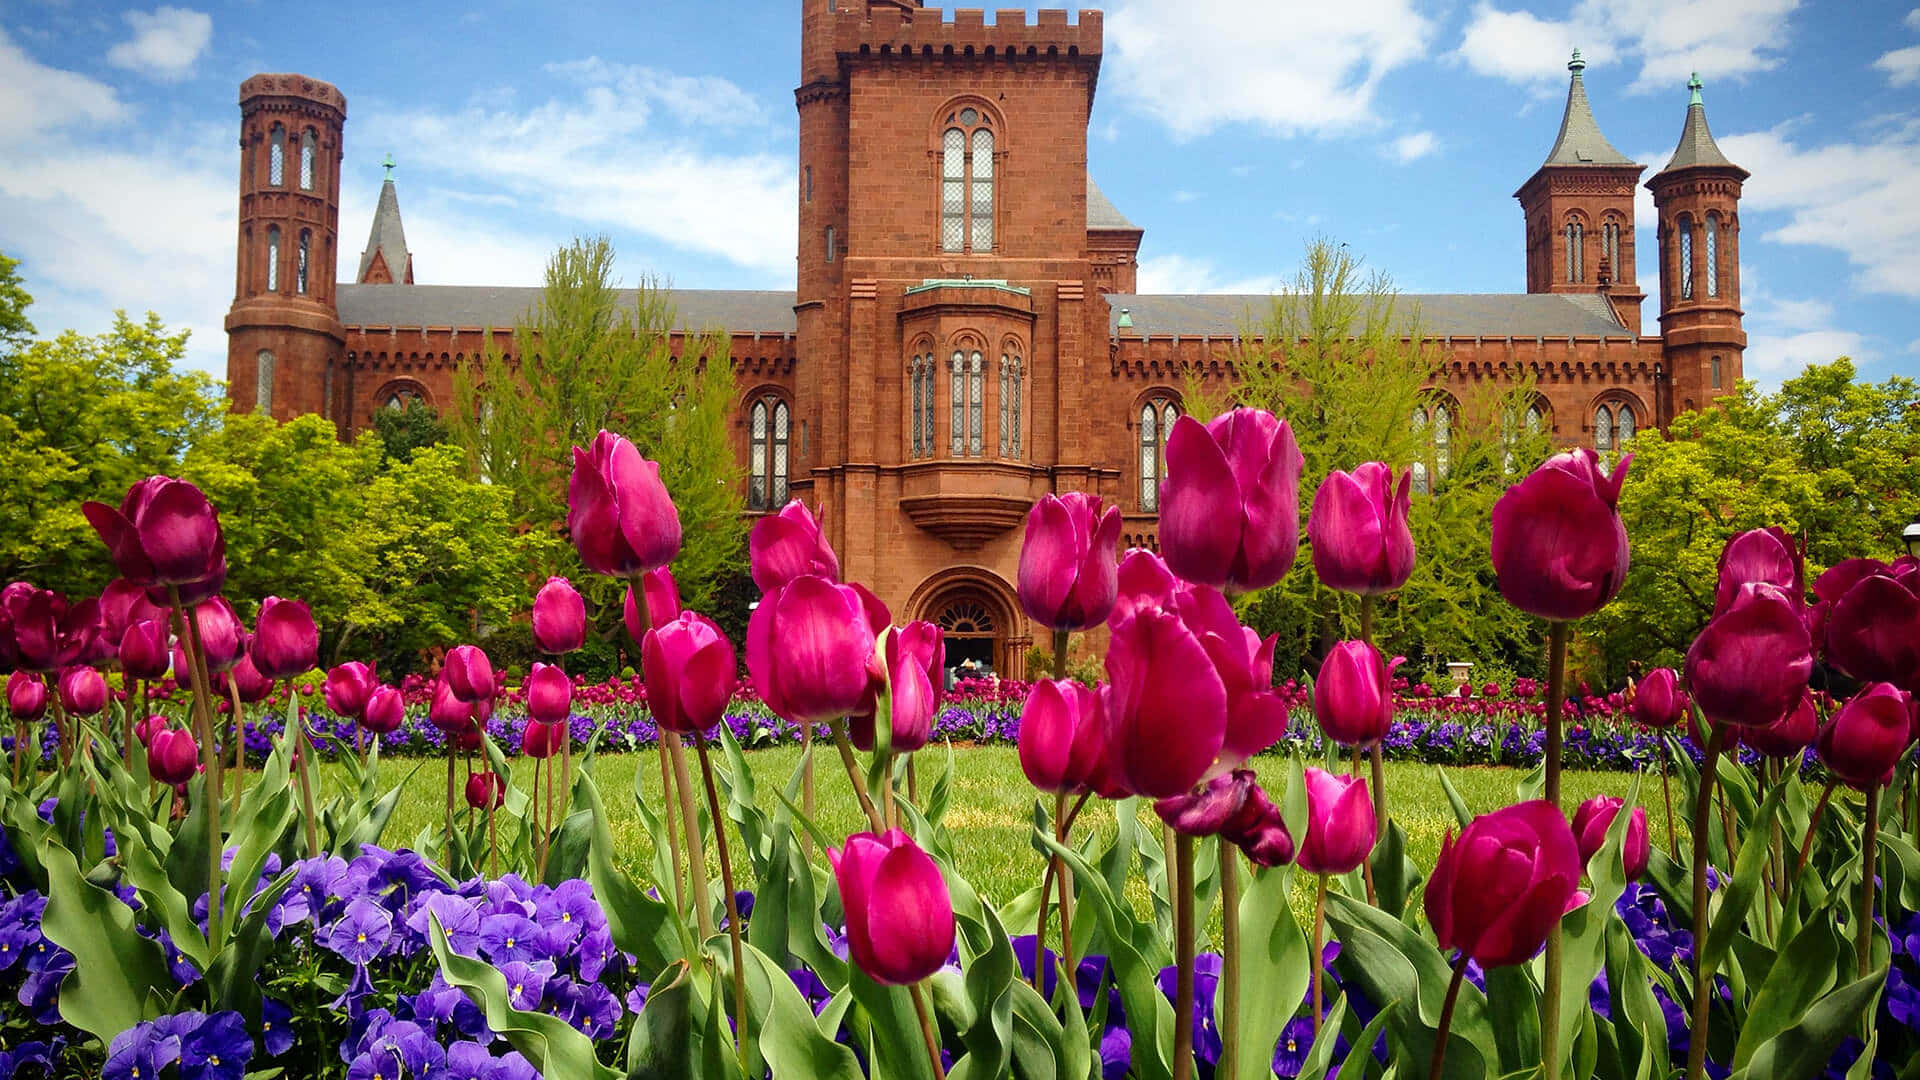 A Large Brick Building With Purple Tulips In Front Of It